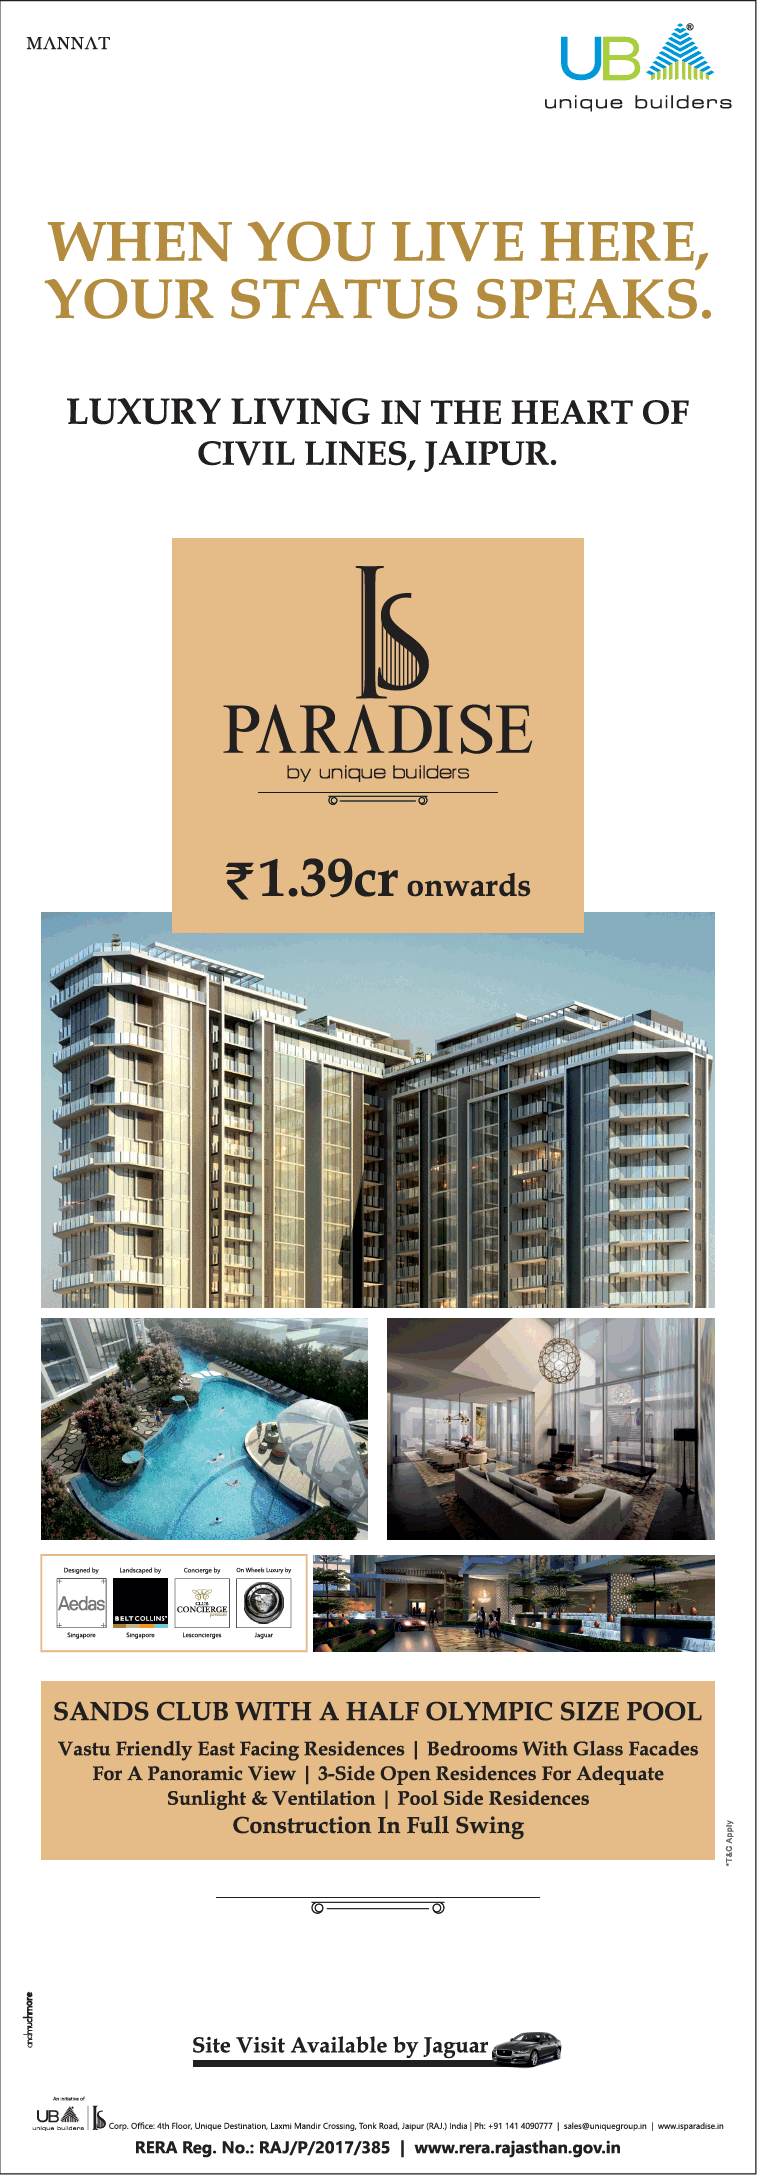 Unique IS Paradise luxury living in the heart of Civil Lines, Jaipur. Update